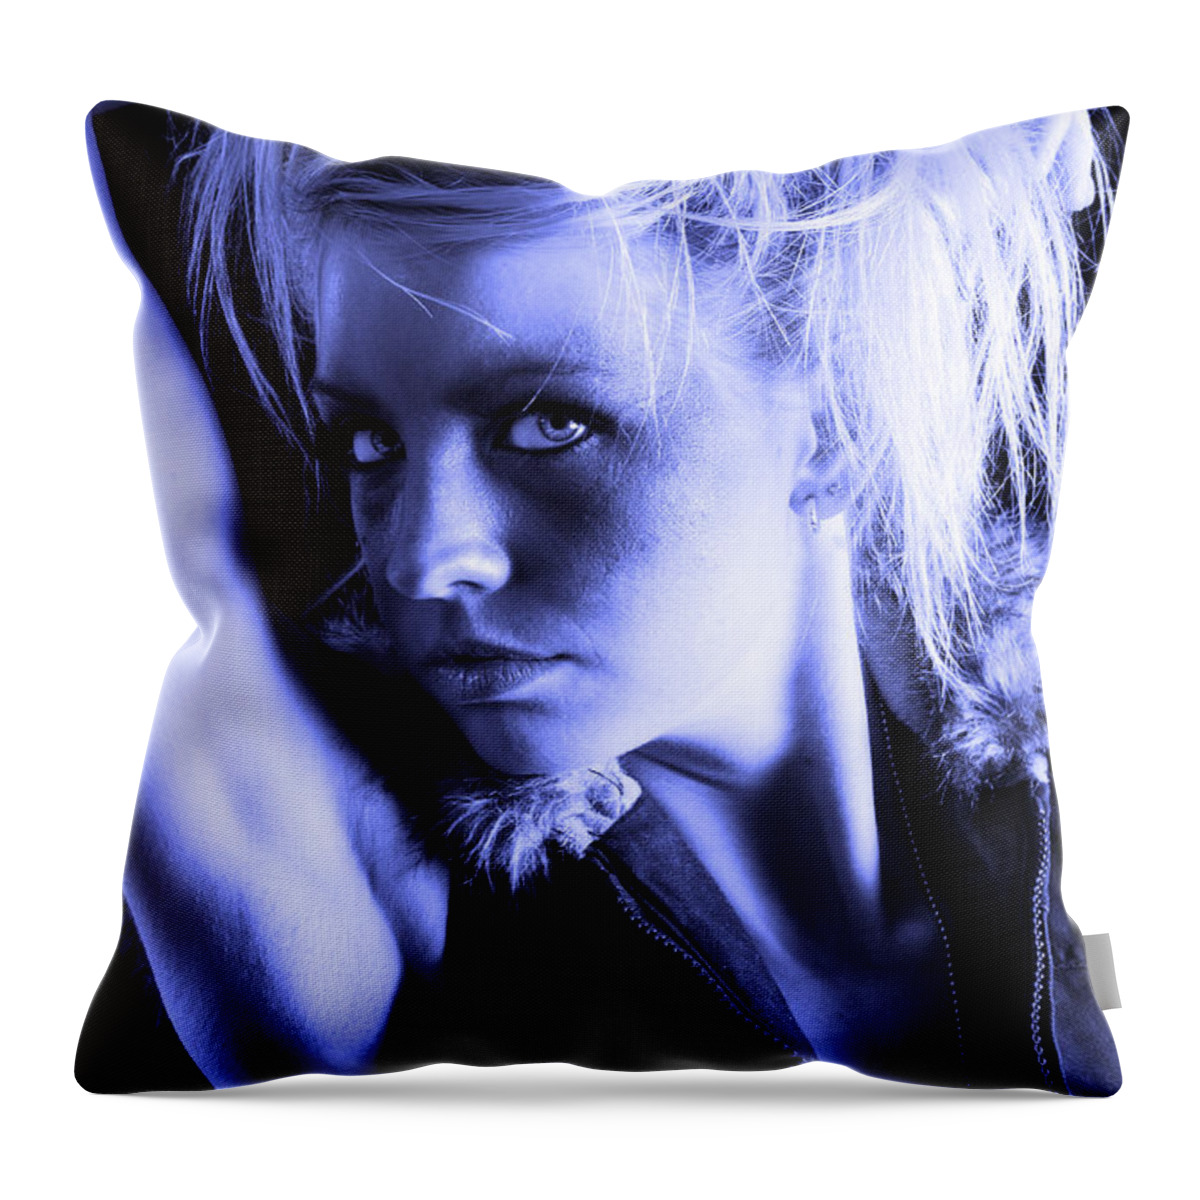 Artistic Photographs Throw Pillow featuring the photograph In the Blue by Robert WK Clark